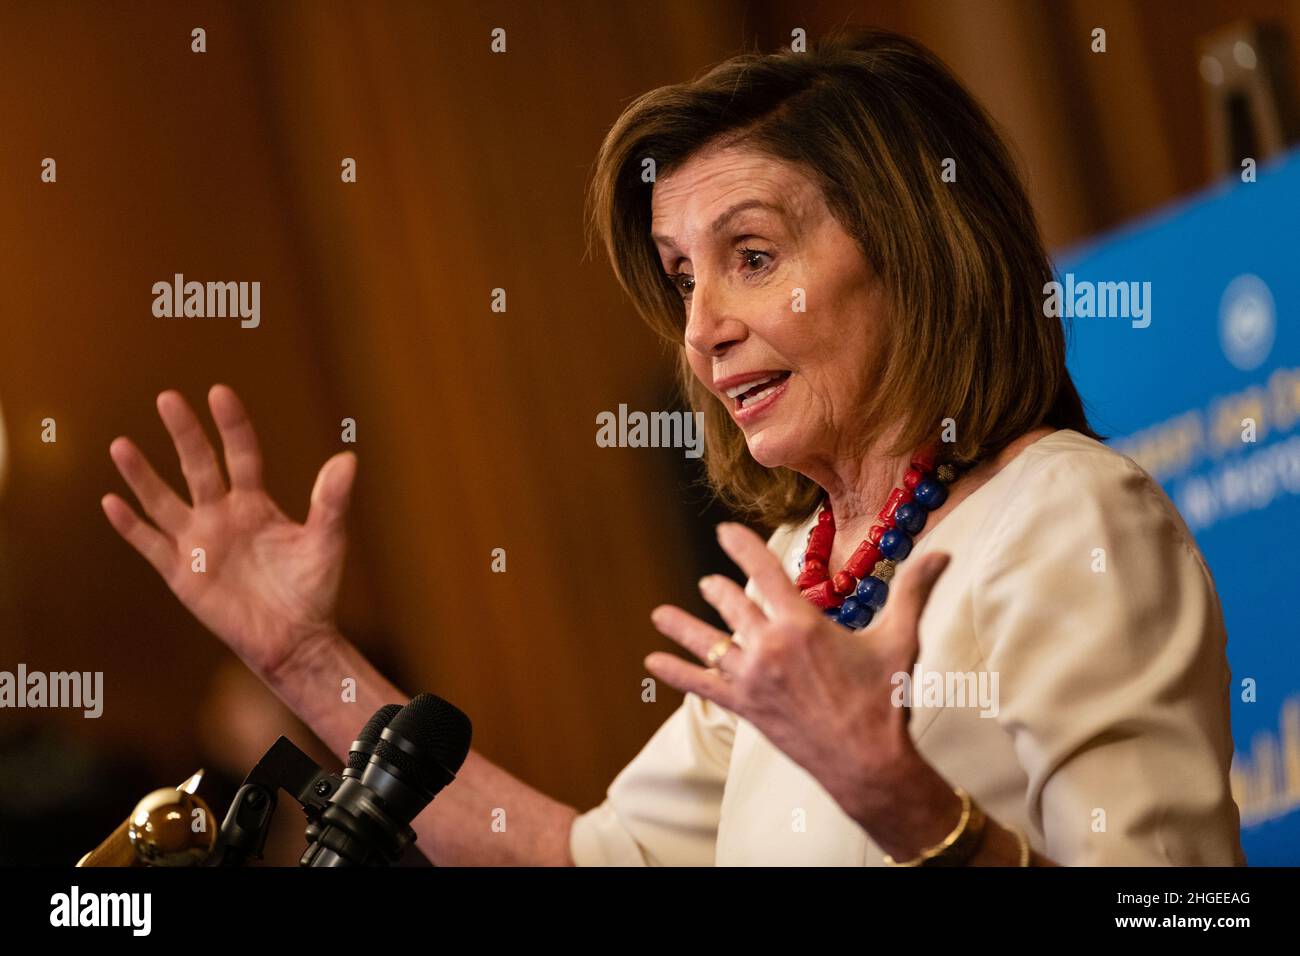 U.S. House Speaker Nancy Pelosi, a Democrat from California, speaks during a news conference at the U.S. Capitol in Washington, D.C., U.S., on Thursday, Jan. 20, 2022. The White House's bid to push voting rights legislation through a divided Senate collapsed yesterday as two key Democrats broke with their party to squash the bill's chances. (Photo by Eric Lee/Pool/Sipa USA) Stock Photo